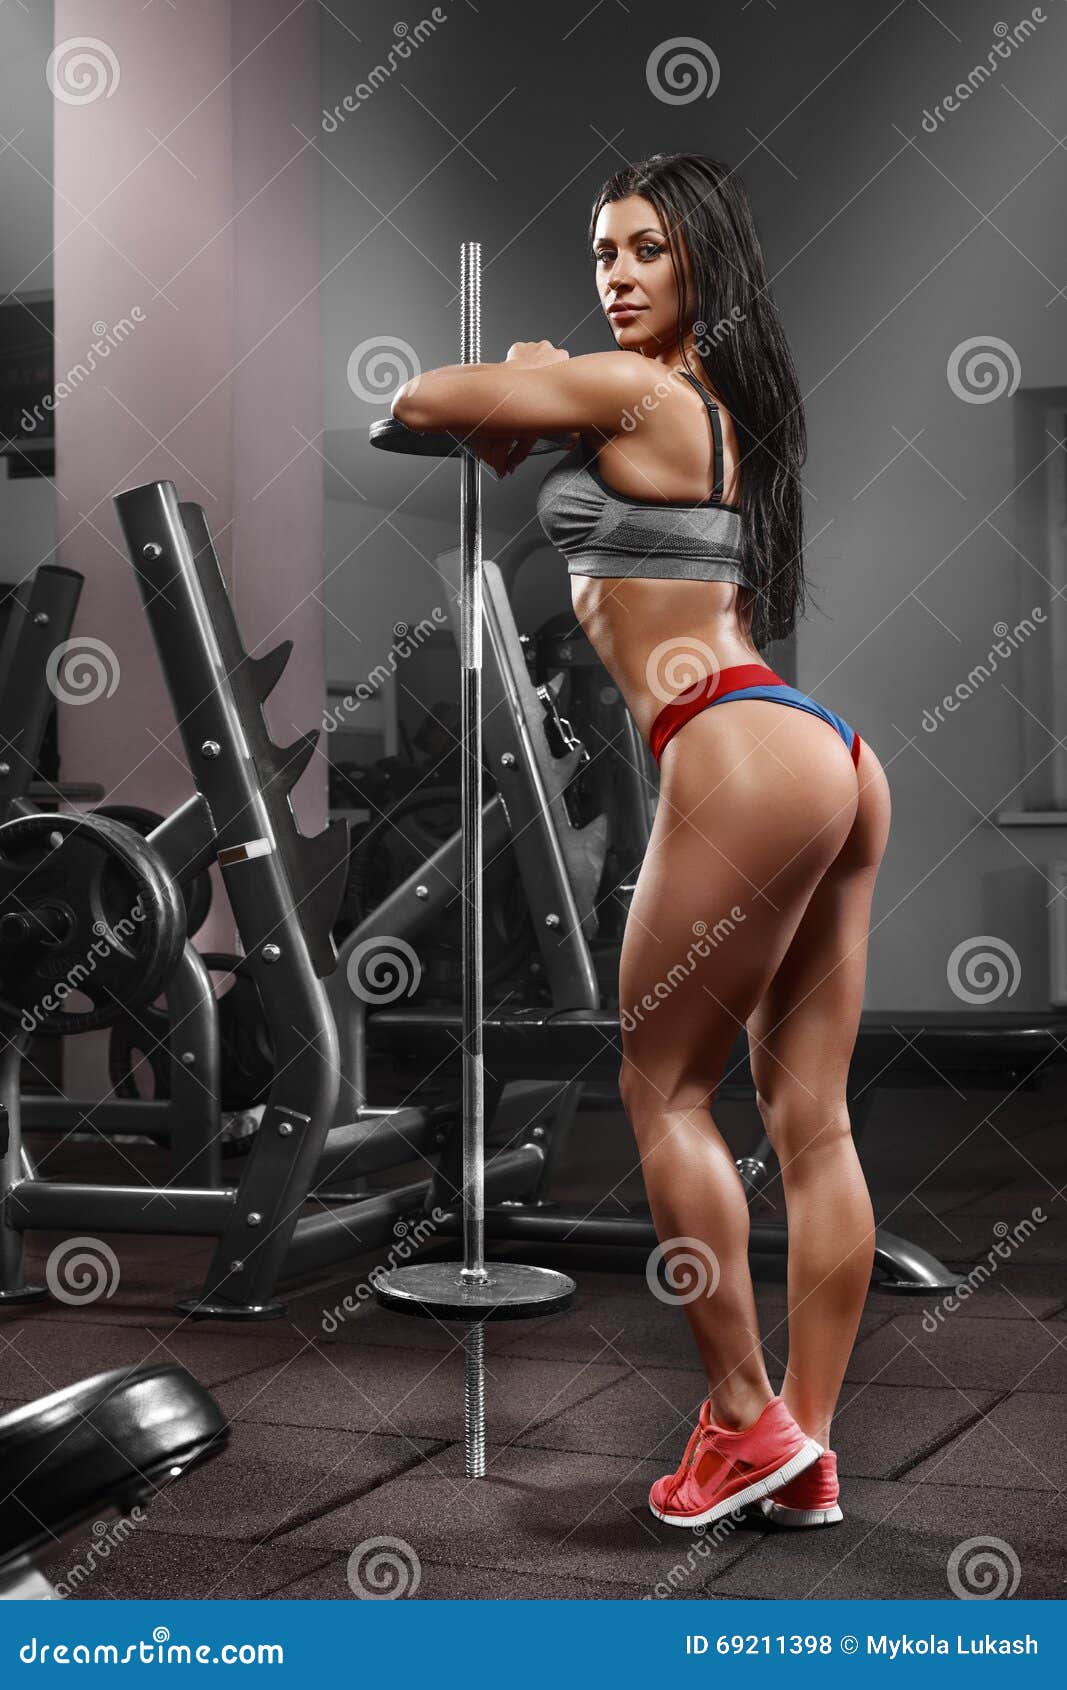 Fitness Girl, Athletic Woman Working Out with Barbell in Gym